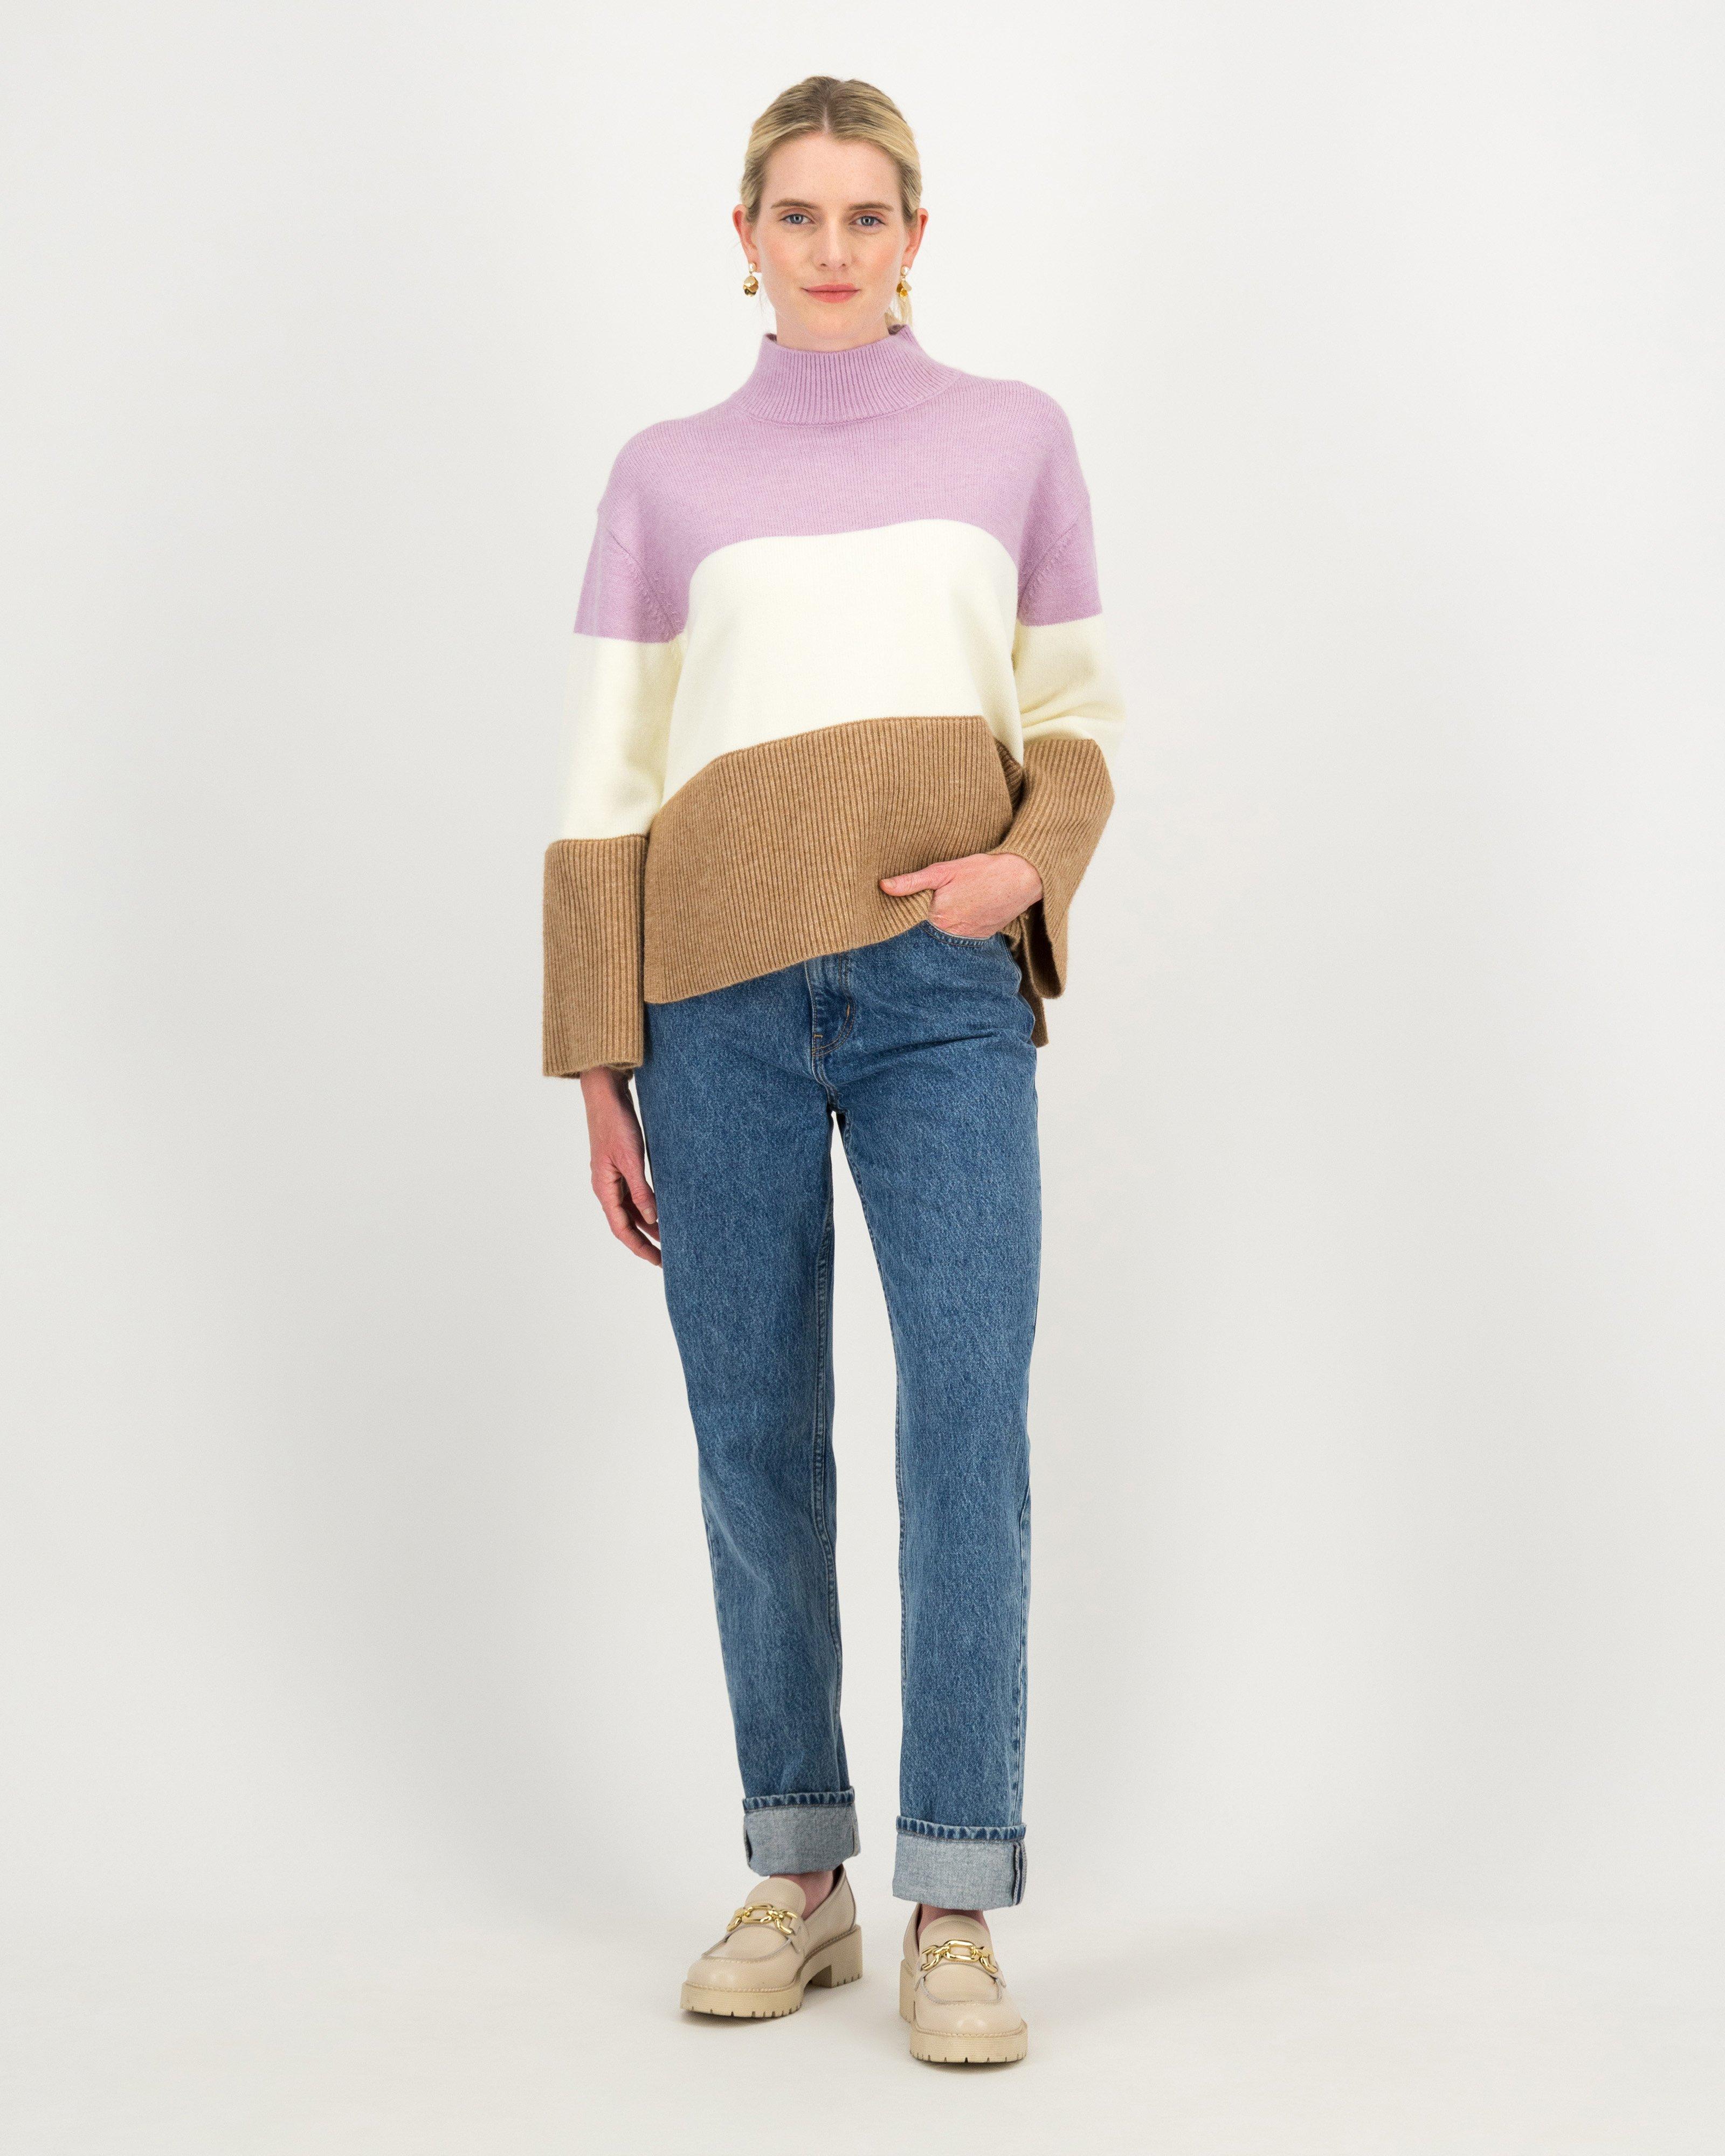 Romie Colourblock Jumper - Poetry Clothing Store